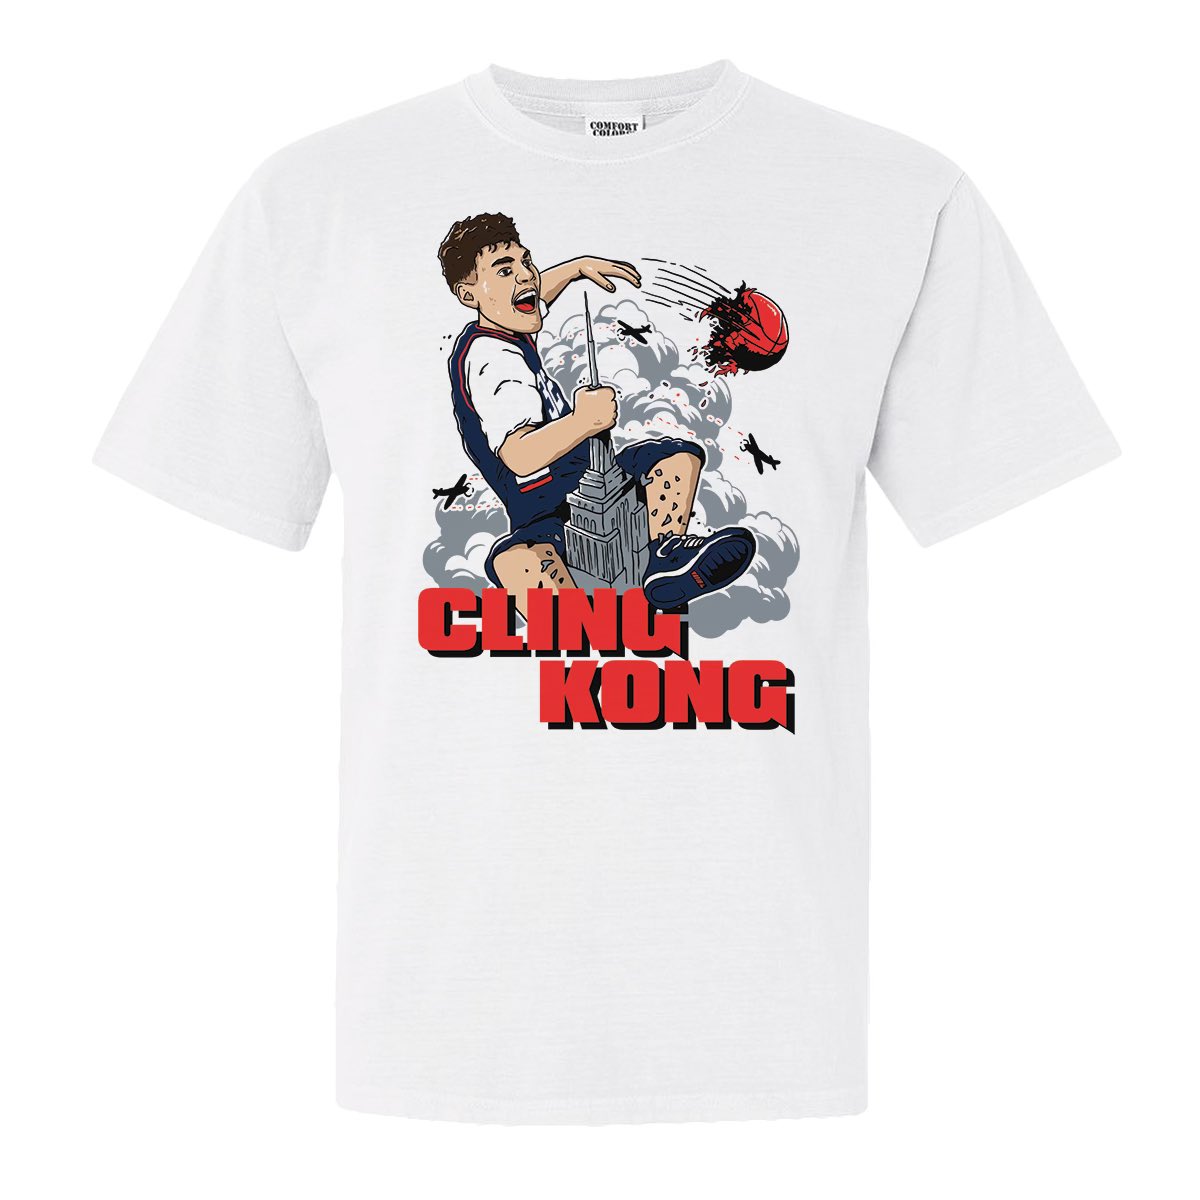 CLING KONG IS A CHAMP @BarstoolStorrs Shop now: store.barstoolsports.com/products/cling…